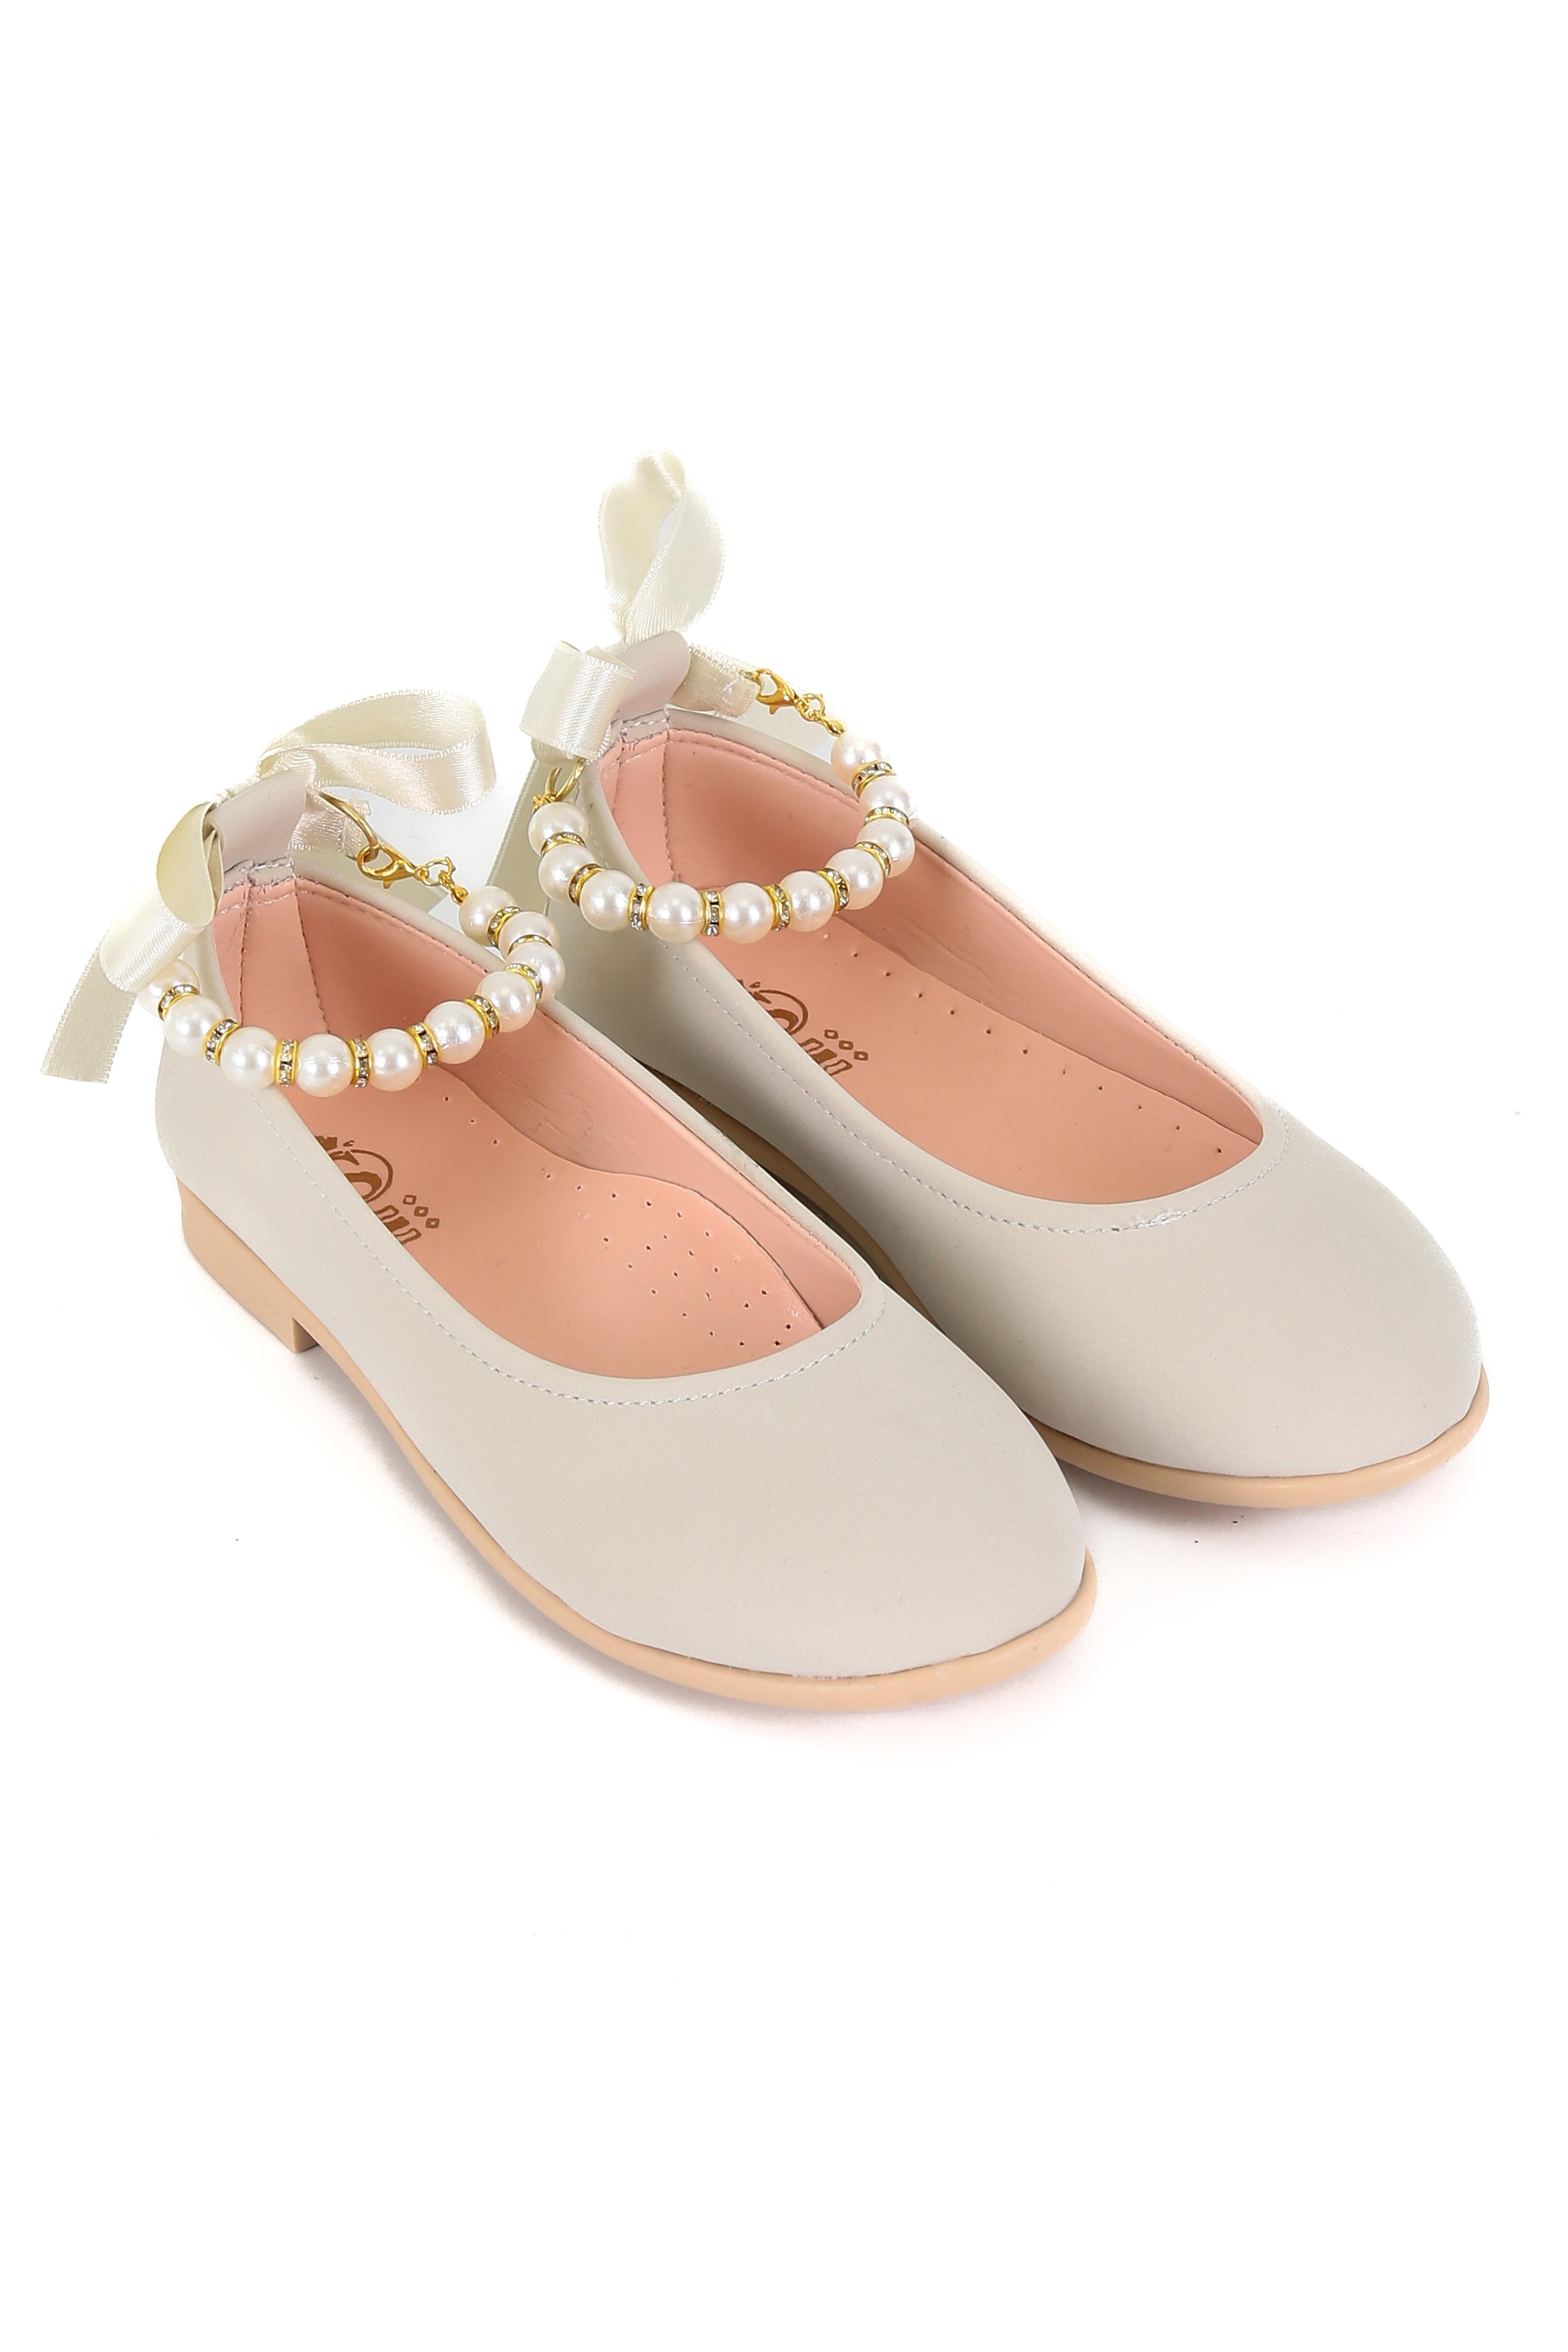 Girls Pearls Flat Mary Jane Shoes - ISABEL - Beige